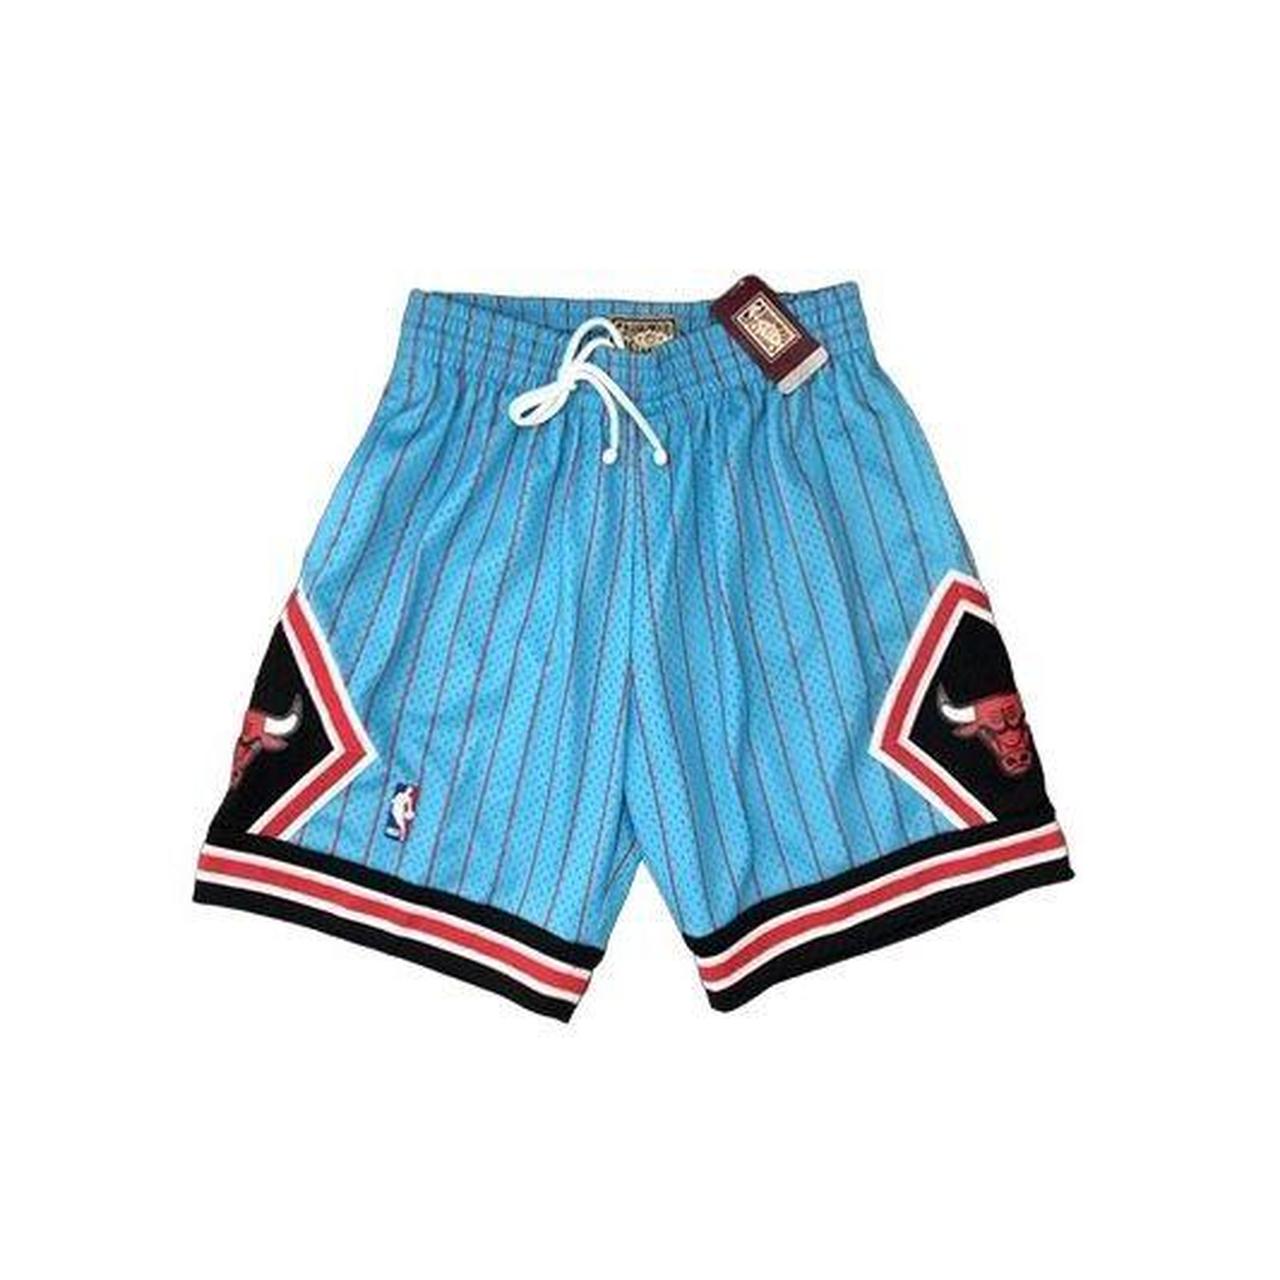 Mitchell & Ness Chicago Bulls Men's Reload Collection Swingman Shorts - Green